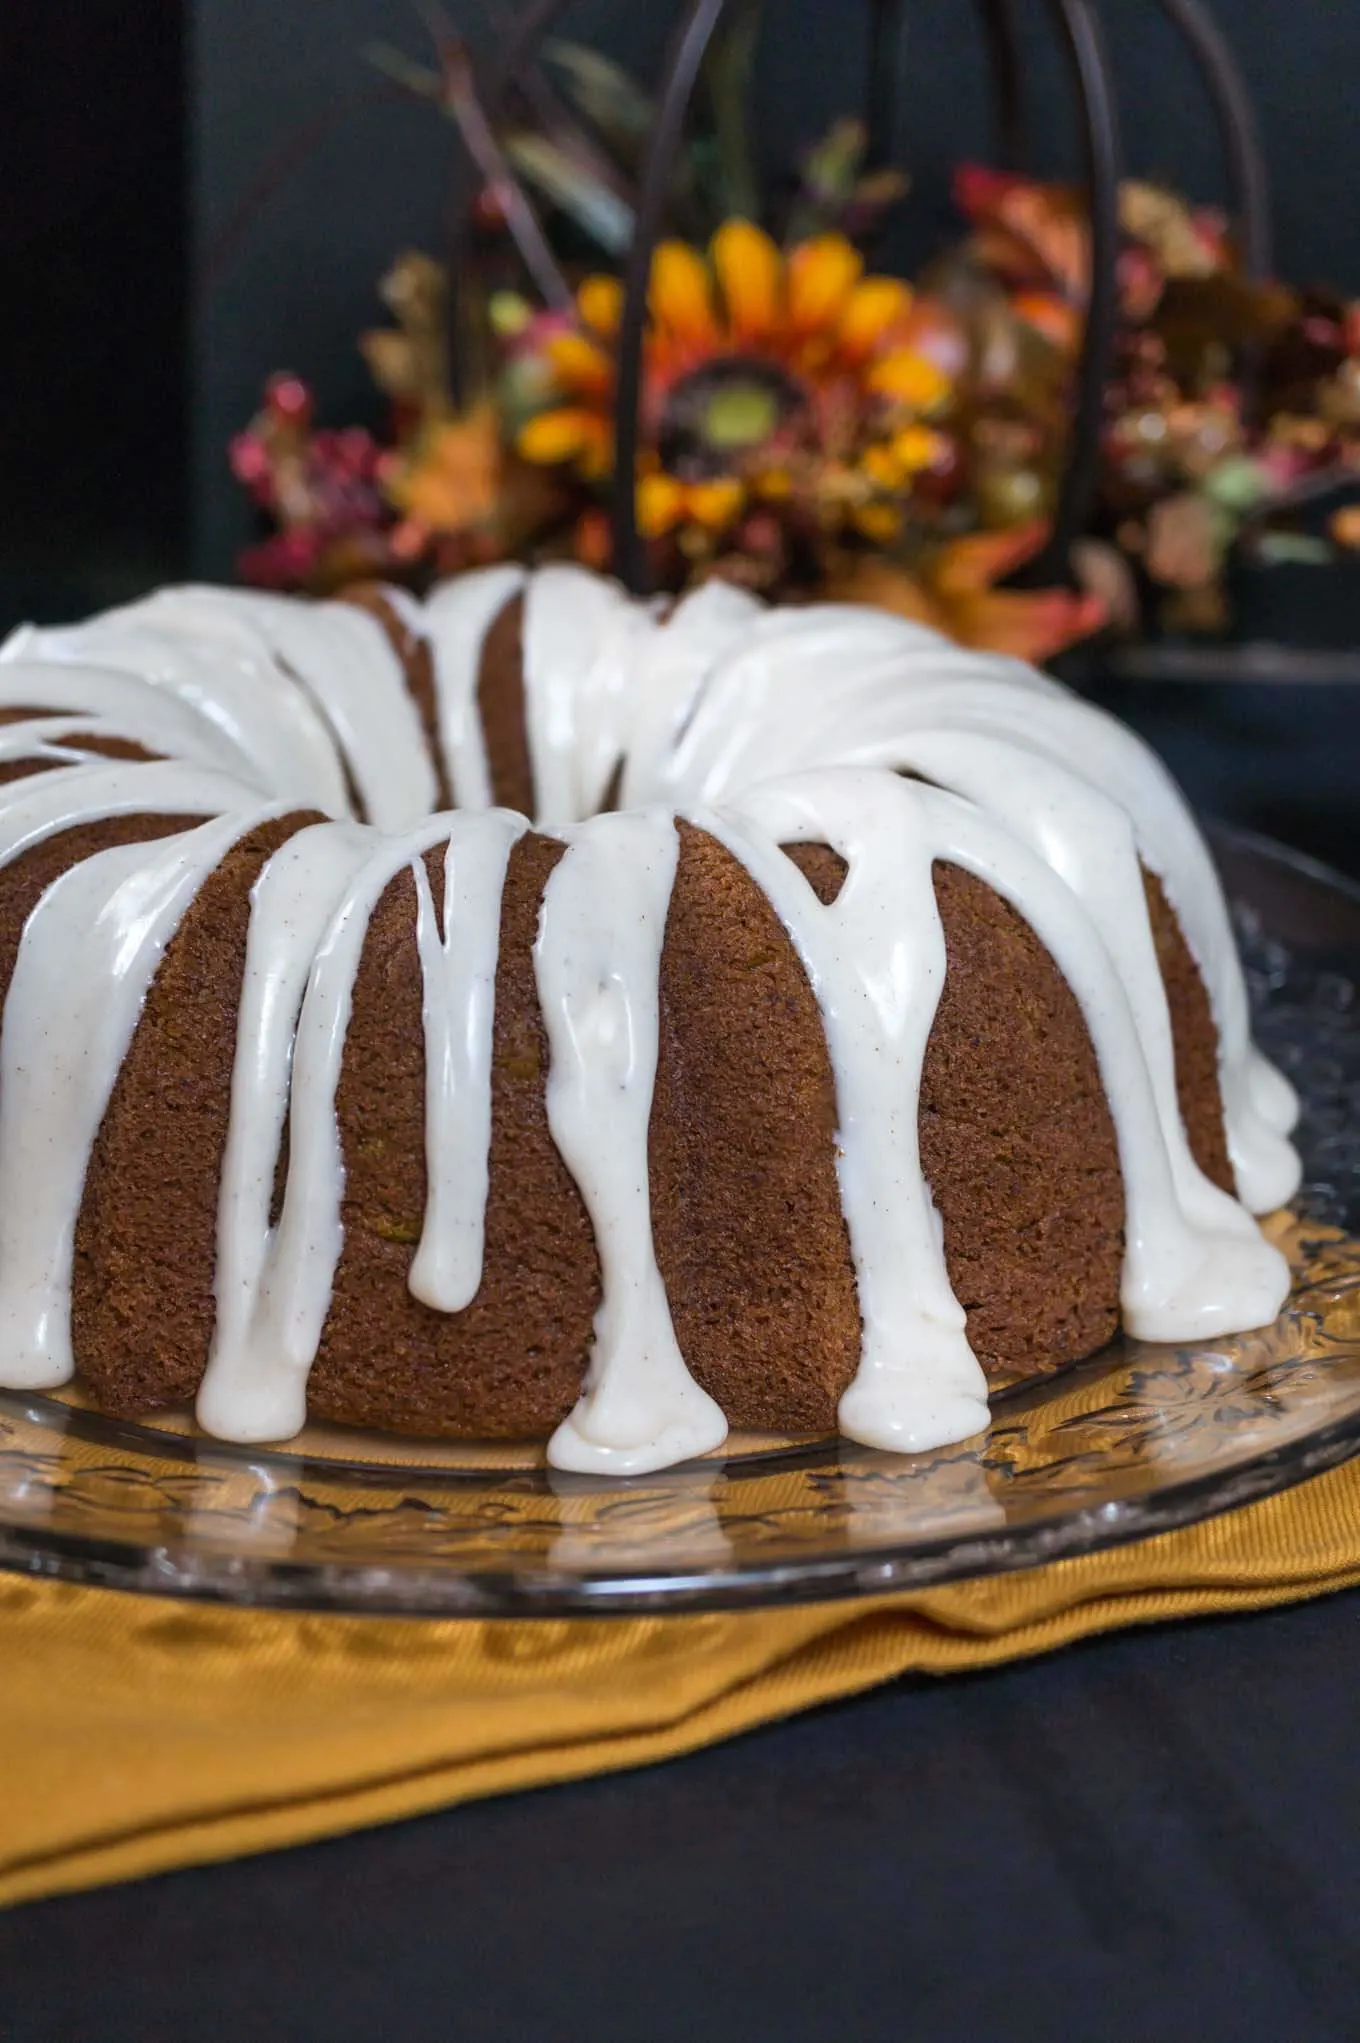 Pumpkin Bundt cake with icing drizzled over the top and dripping onto the serving platter with fall flowers sitting behind it.